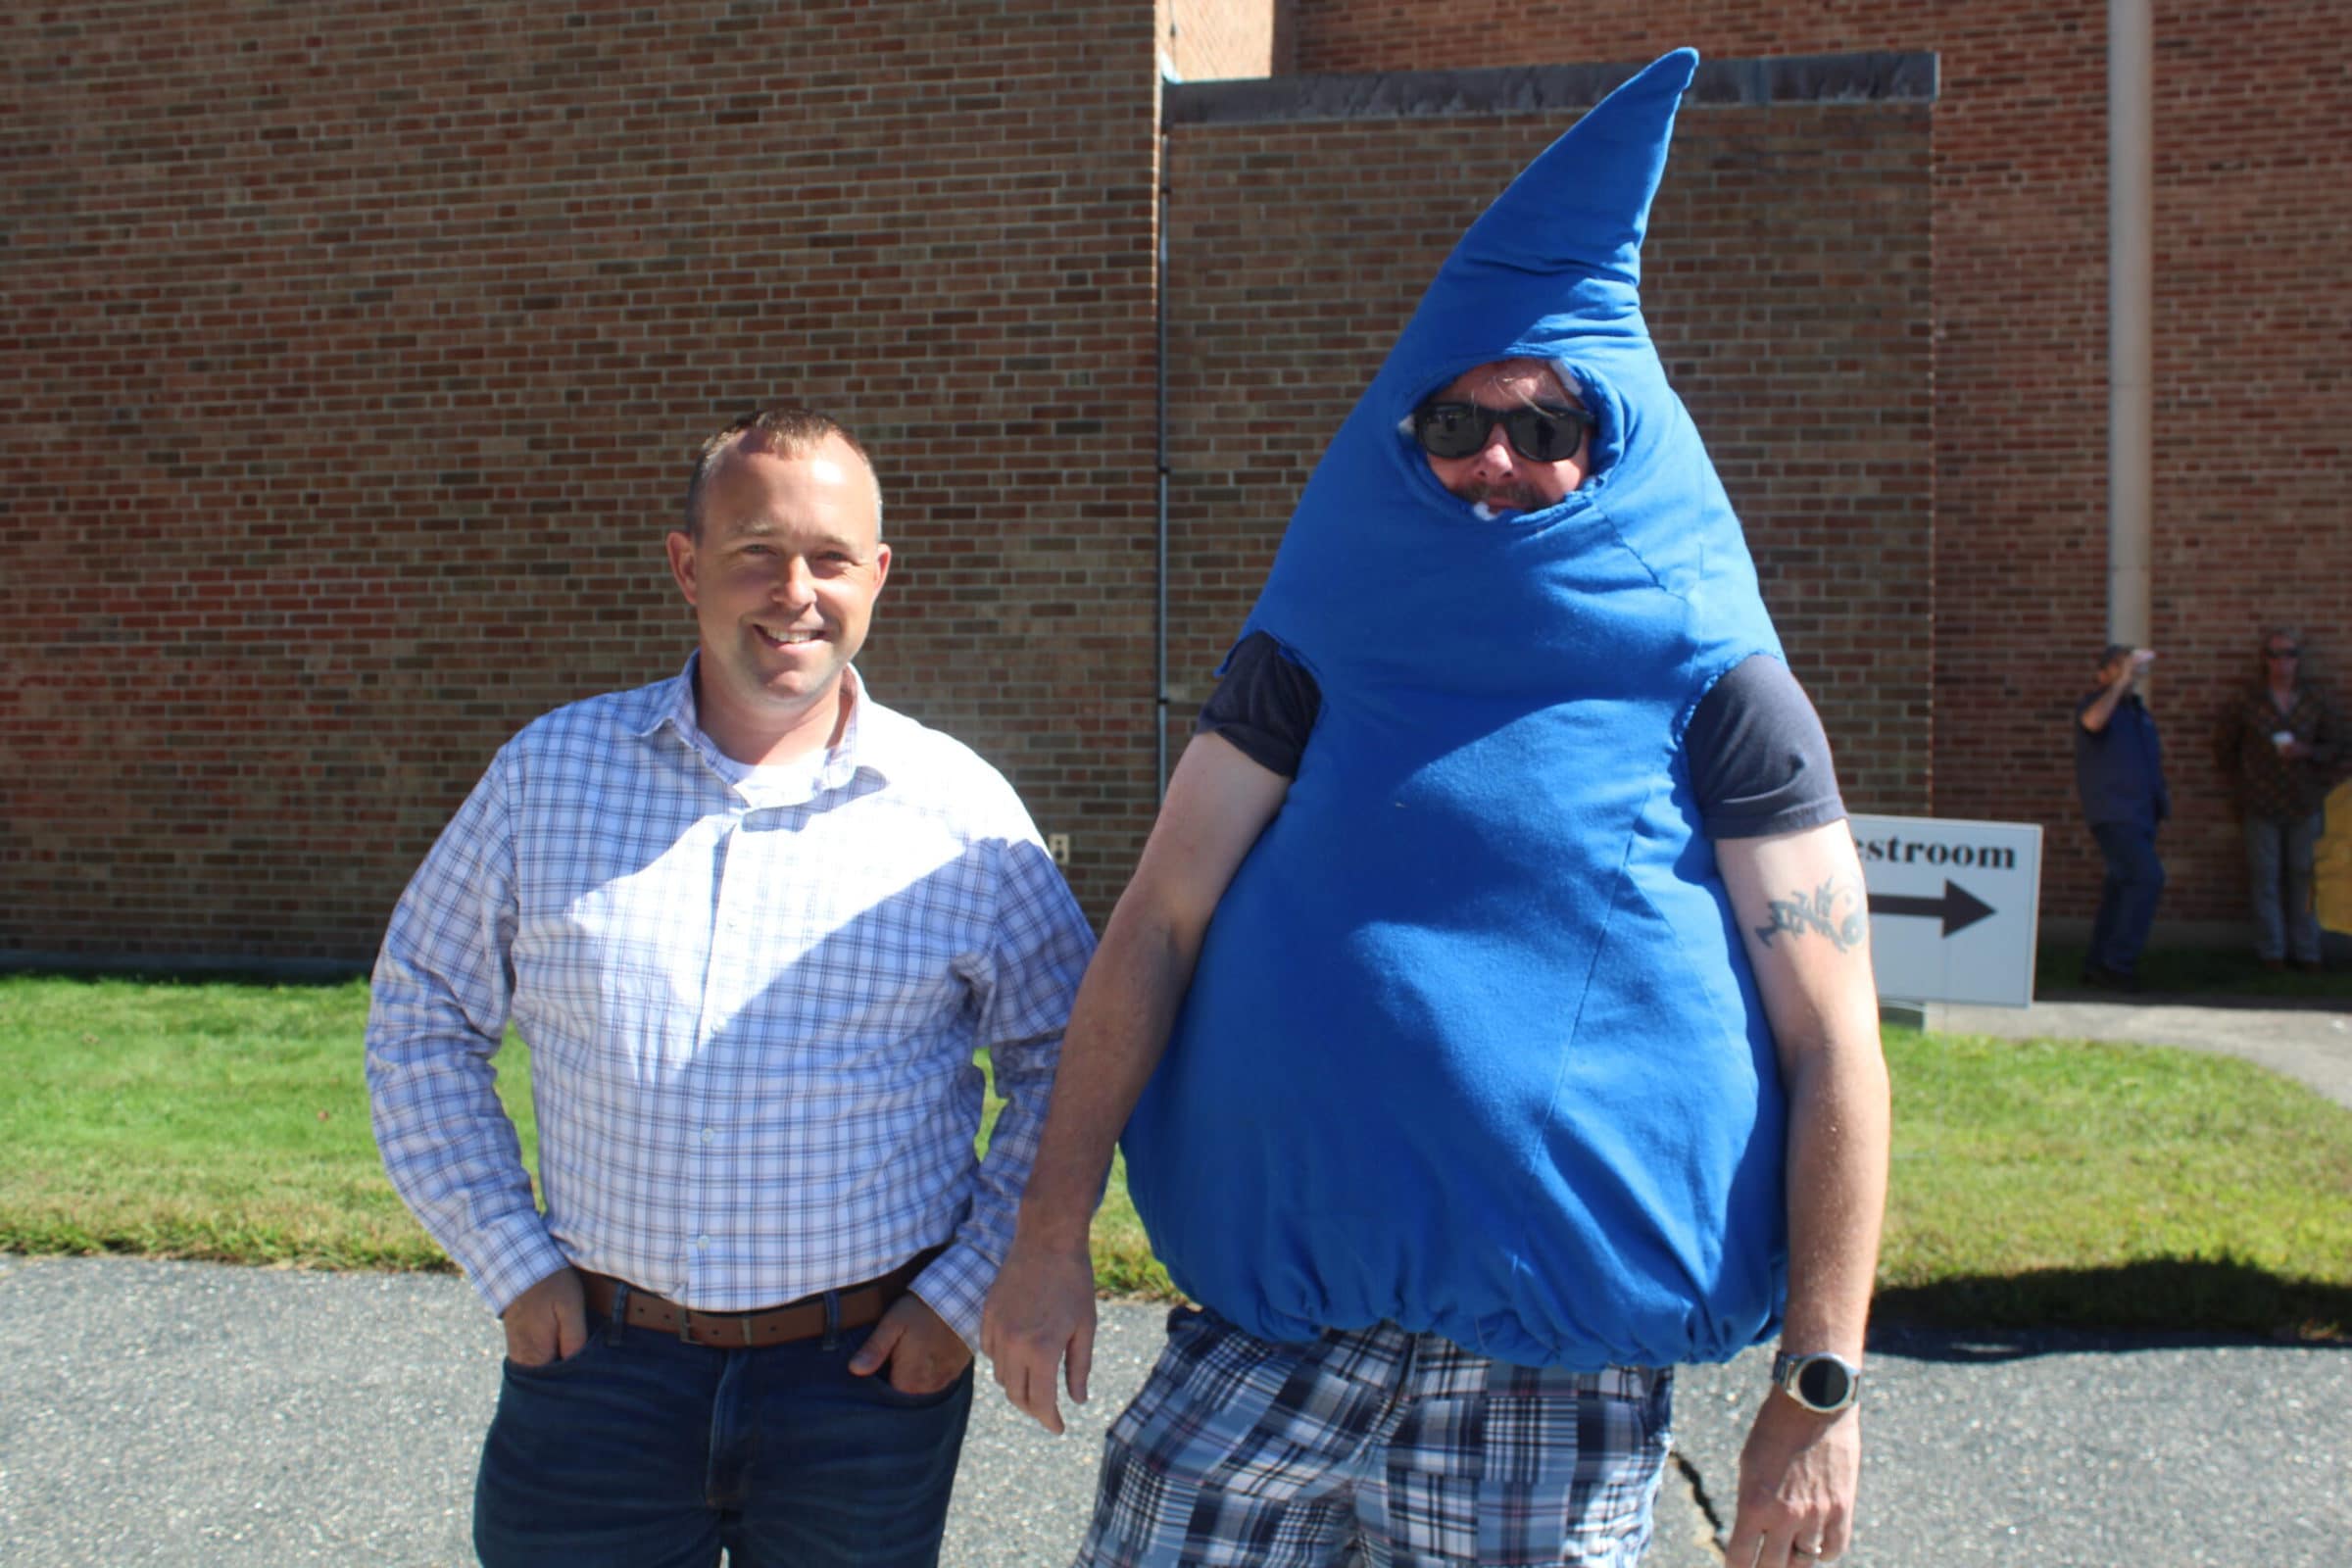 Shrewsbury Water and Sewer Superintendent Dan Rowley stands with Town Engineer Andy Truman, who took part in the costume parade at this year’s Spirit of Shrewsbury.